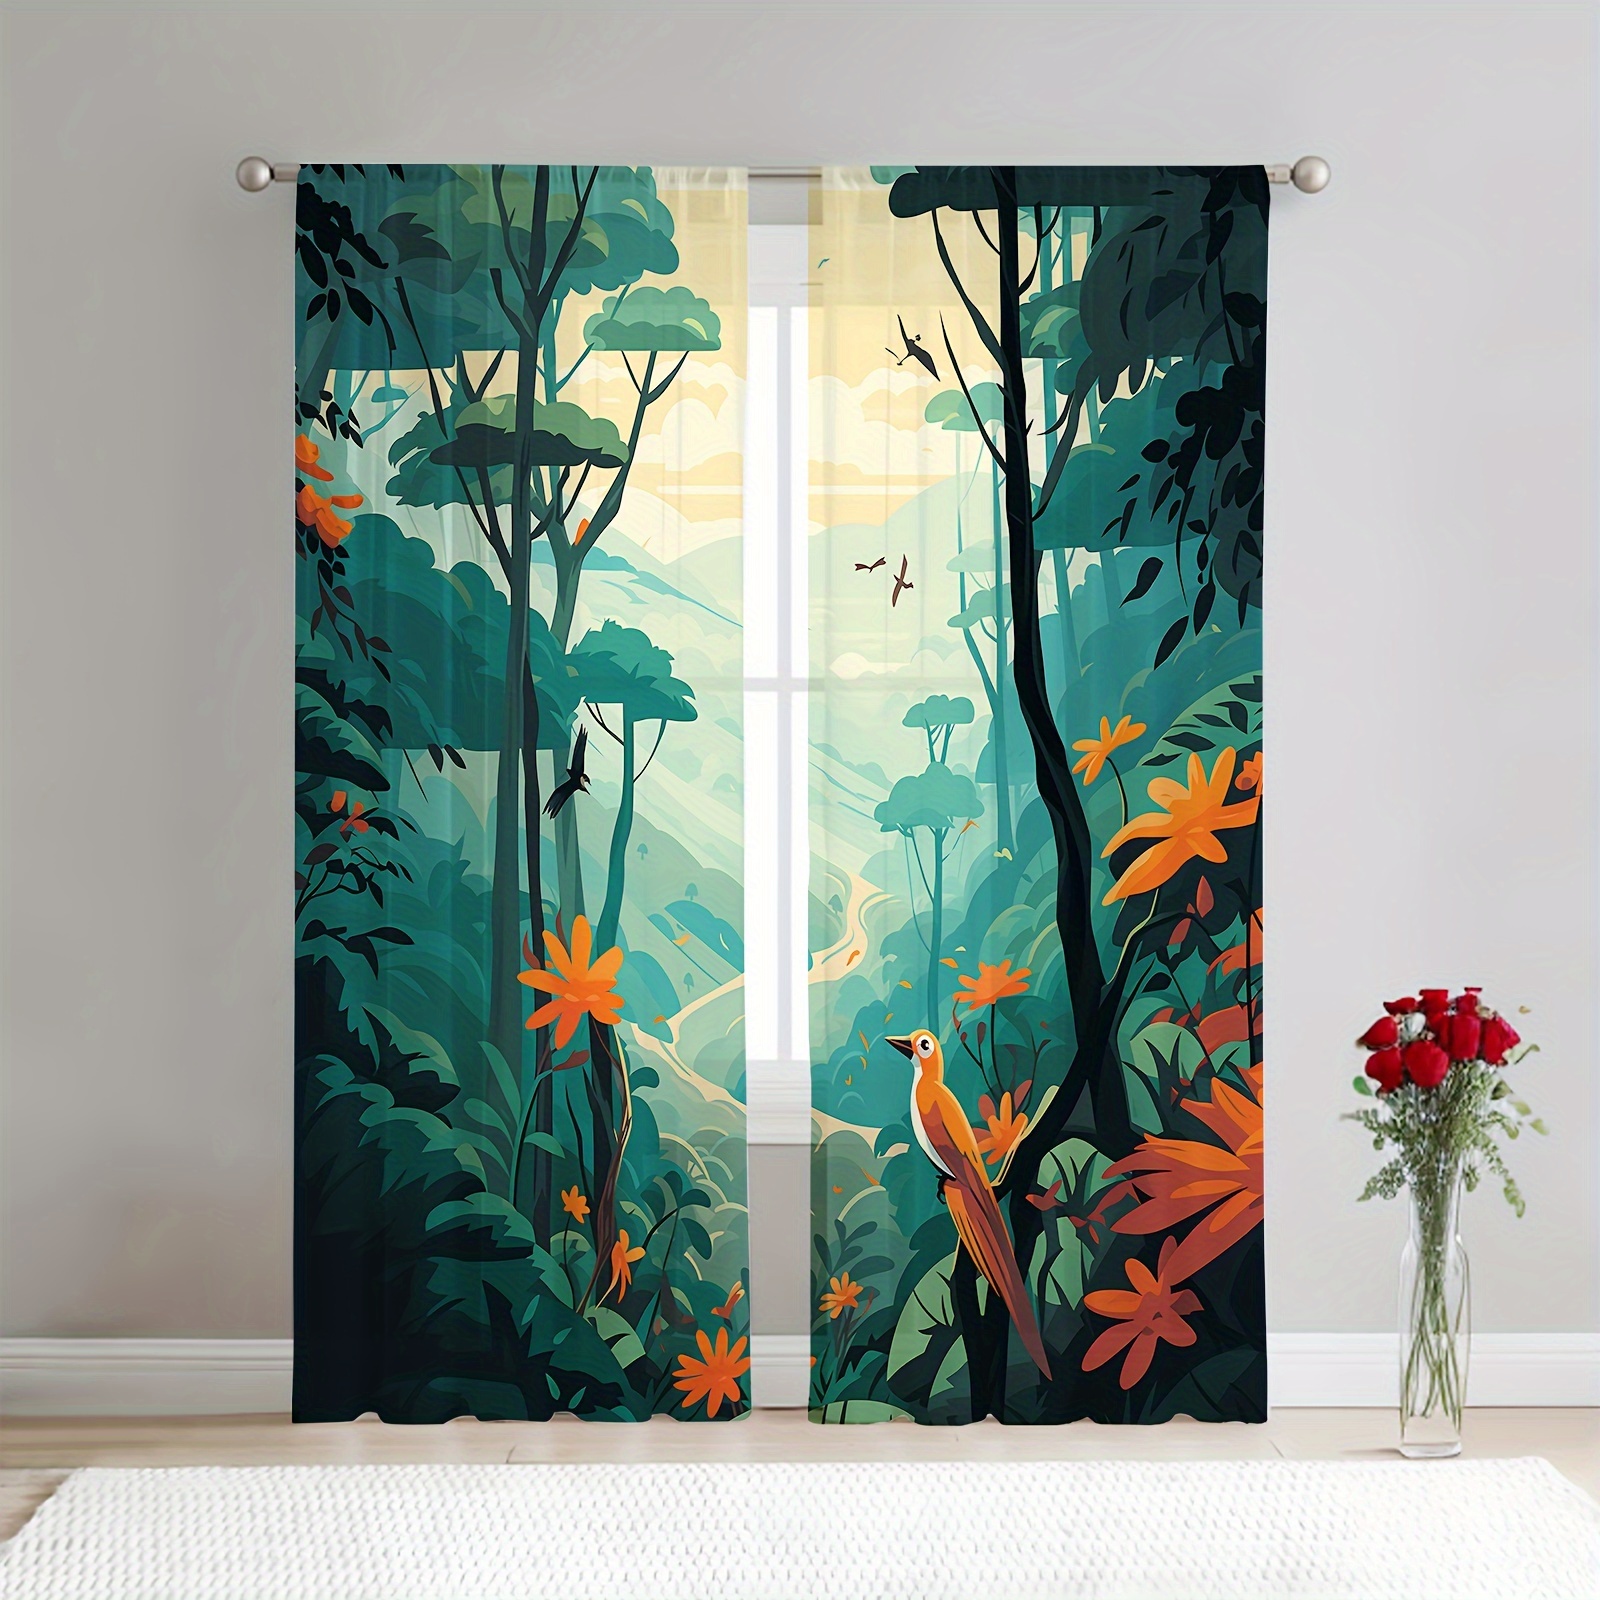 Enchanted Forest Shower Curtain with Deep Tropical Jungle